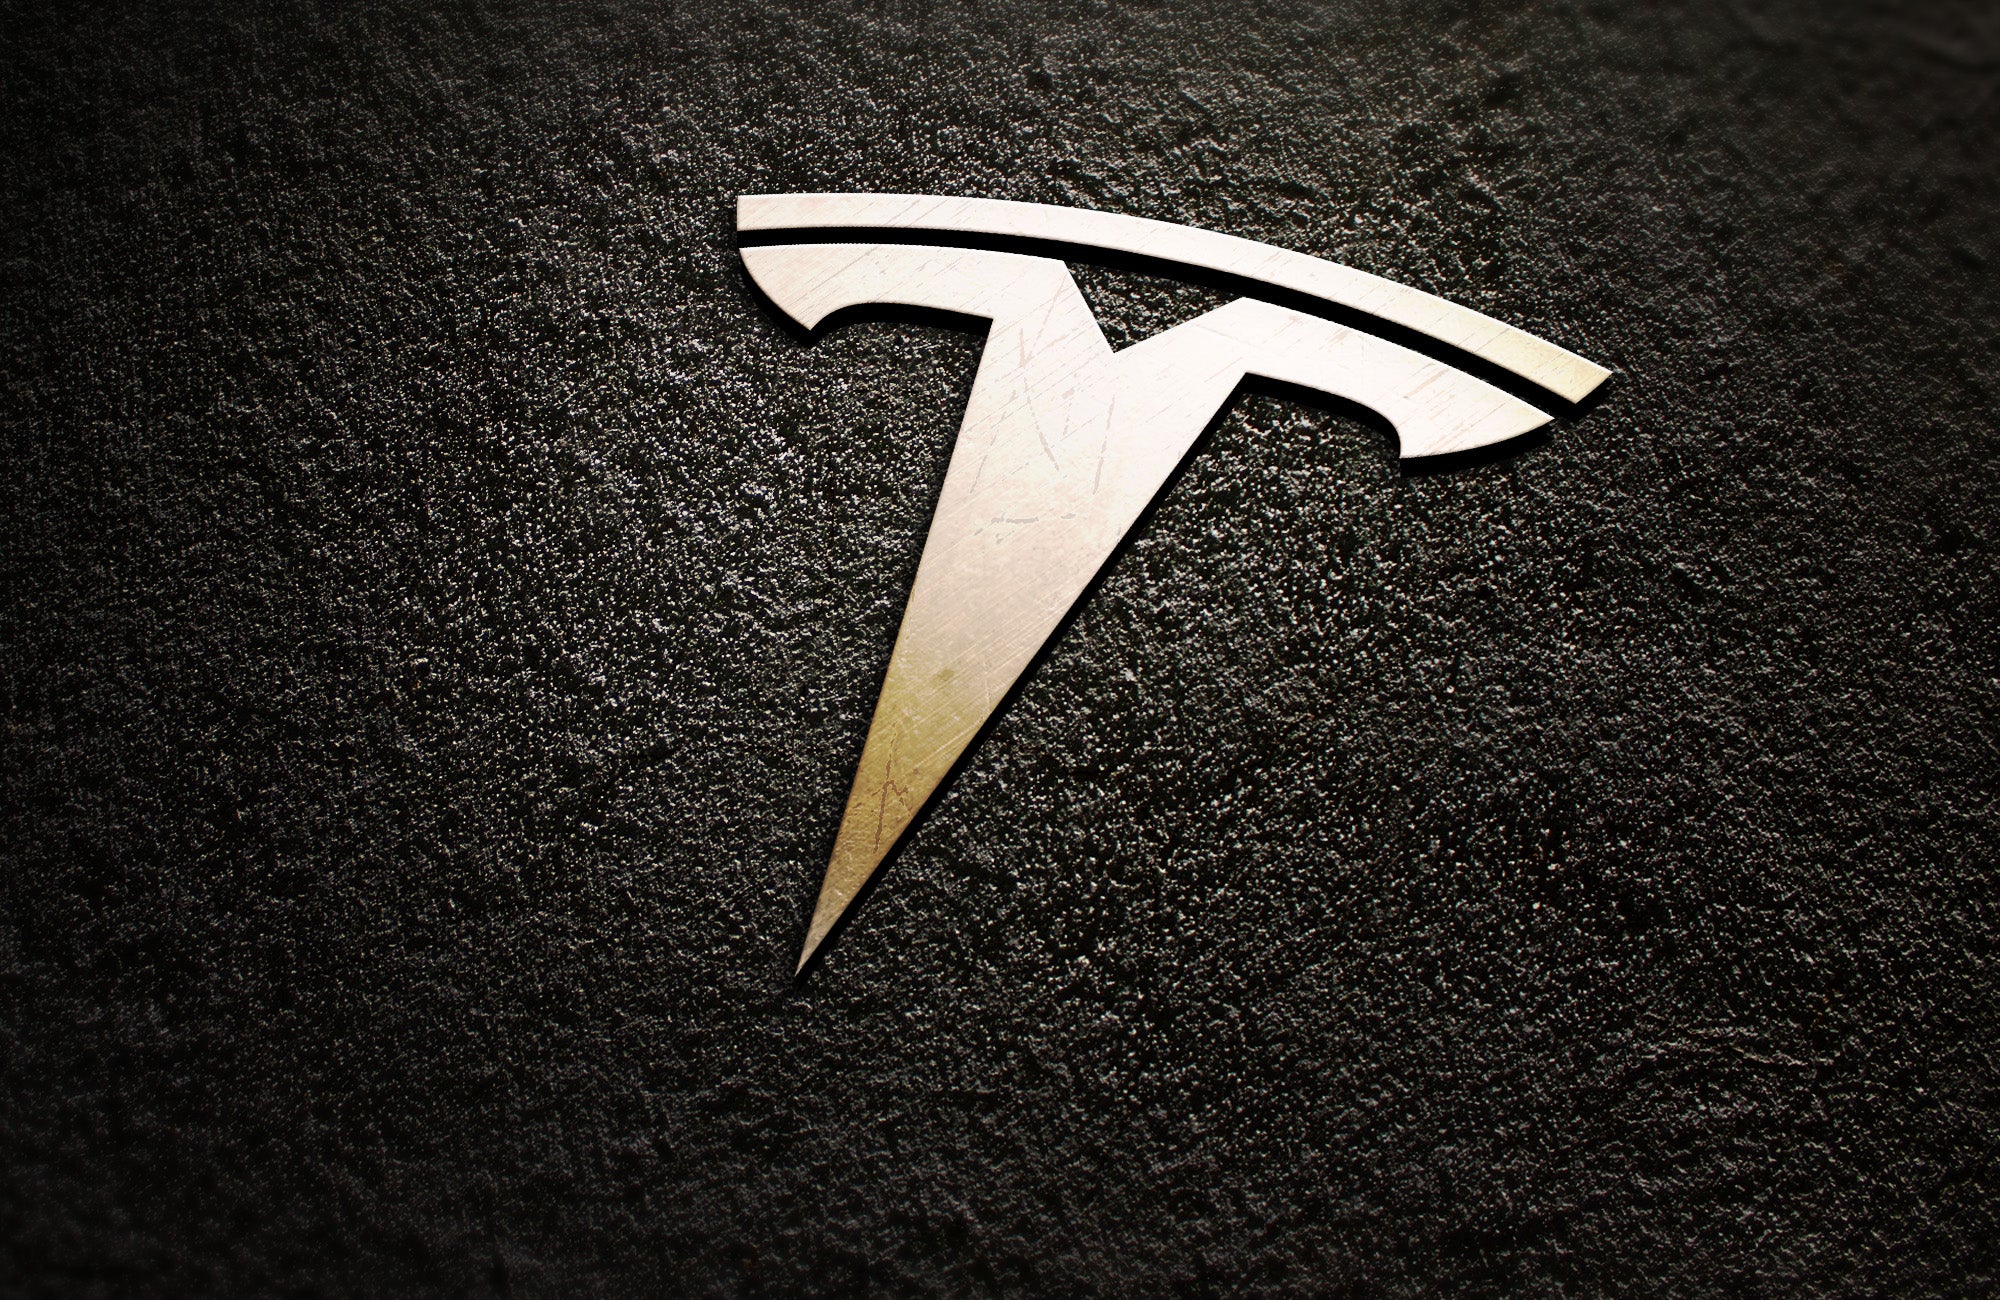 Tesla TSLA Could Surpass 500K Delivery Target on Strong China Demand, Says Wedbush Securities